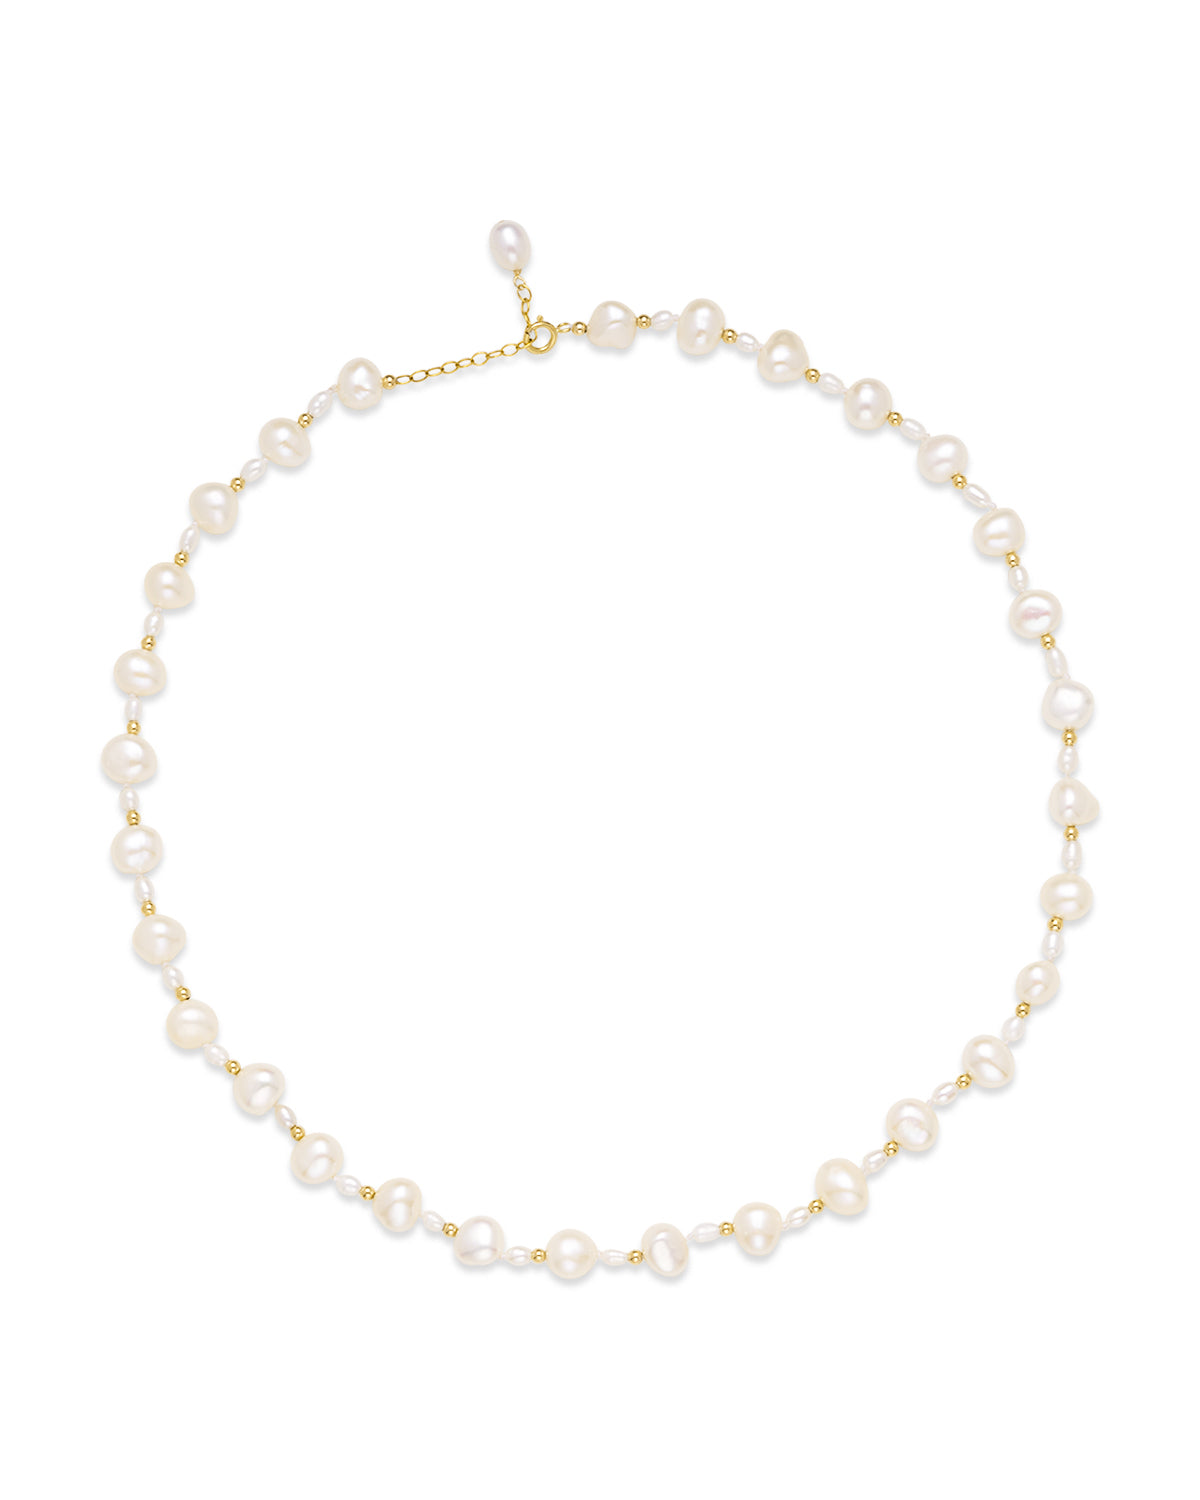 4-5mm Baroque Freshwater Pearl Gap Necklace